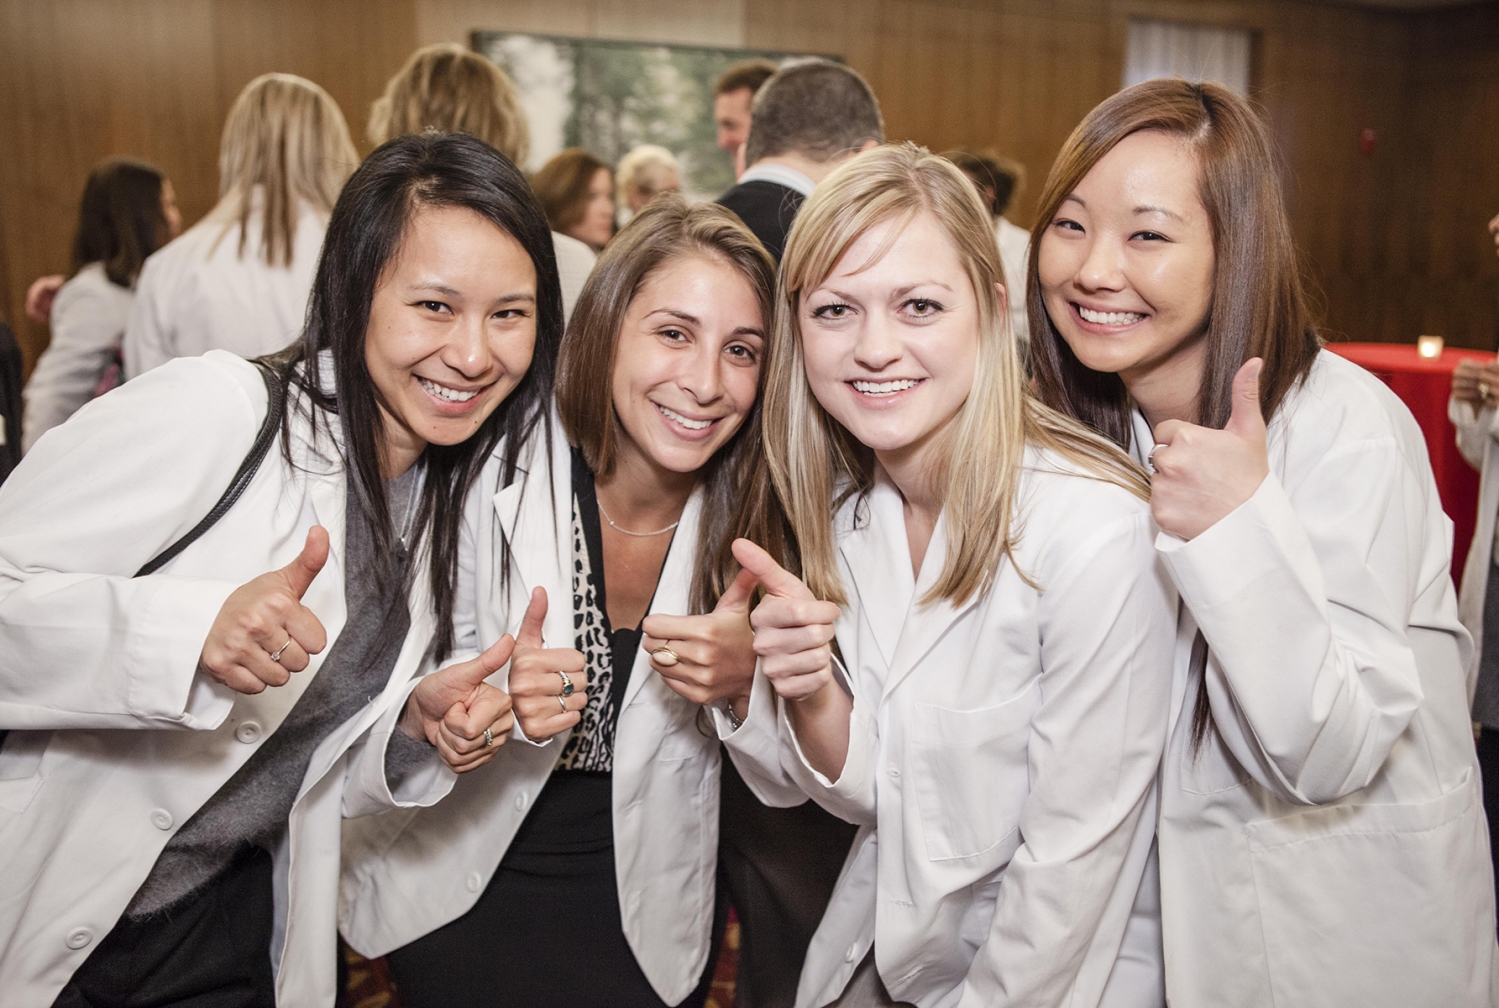 Physician assistant students Zoe Chan, Jenna Green, Tristyn Richendifer and Sarah So All photos: Carlos Rene Perez